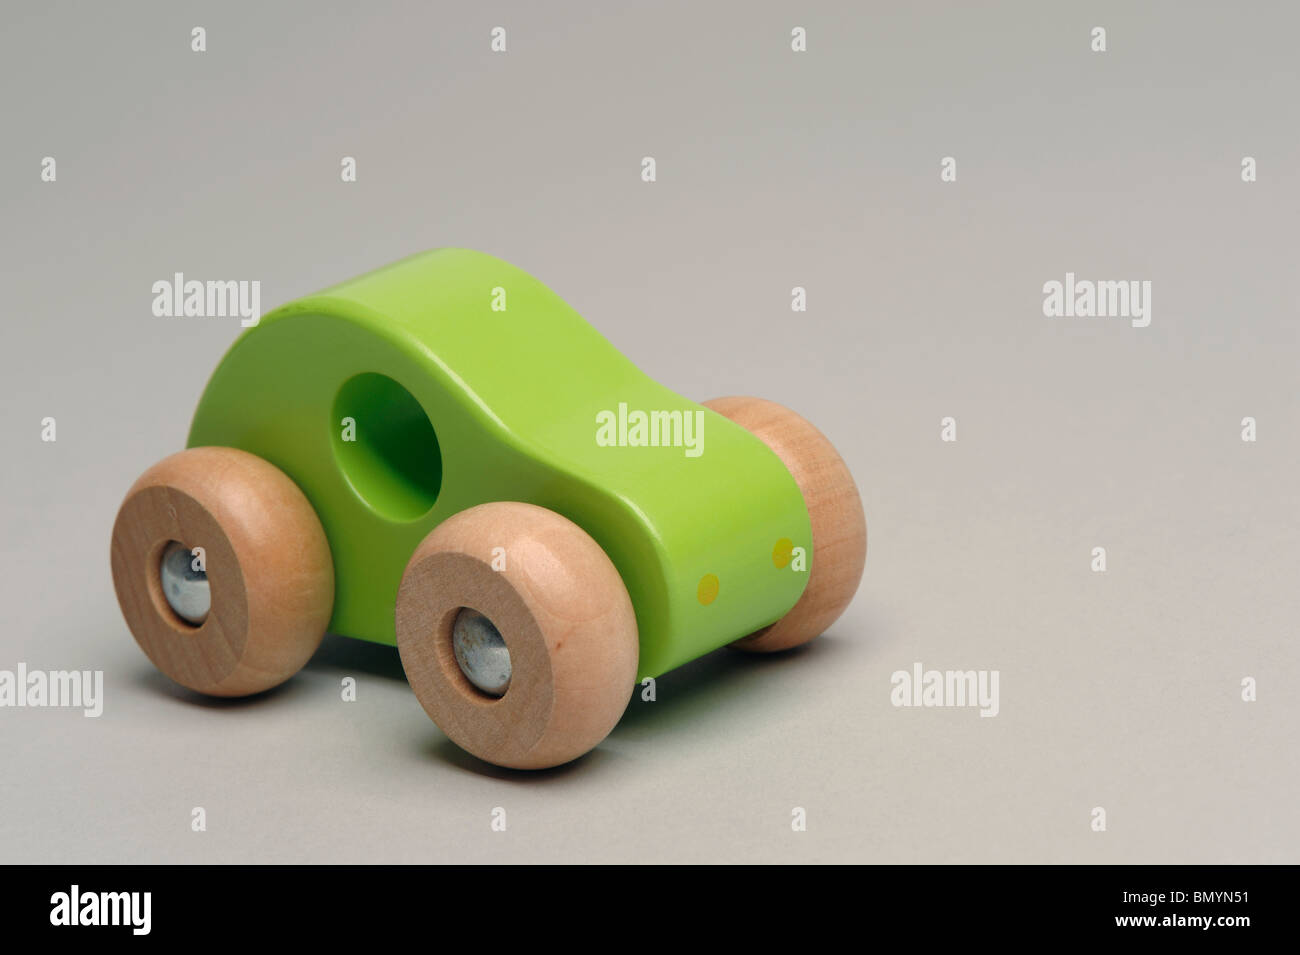 Toy wooden car Stock Photo